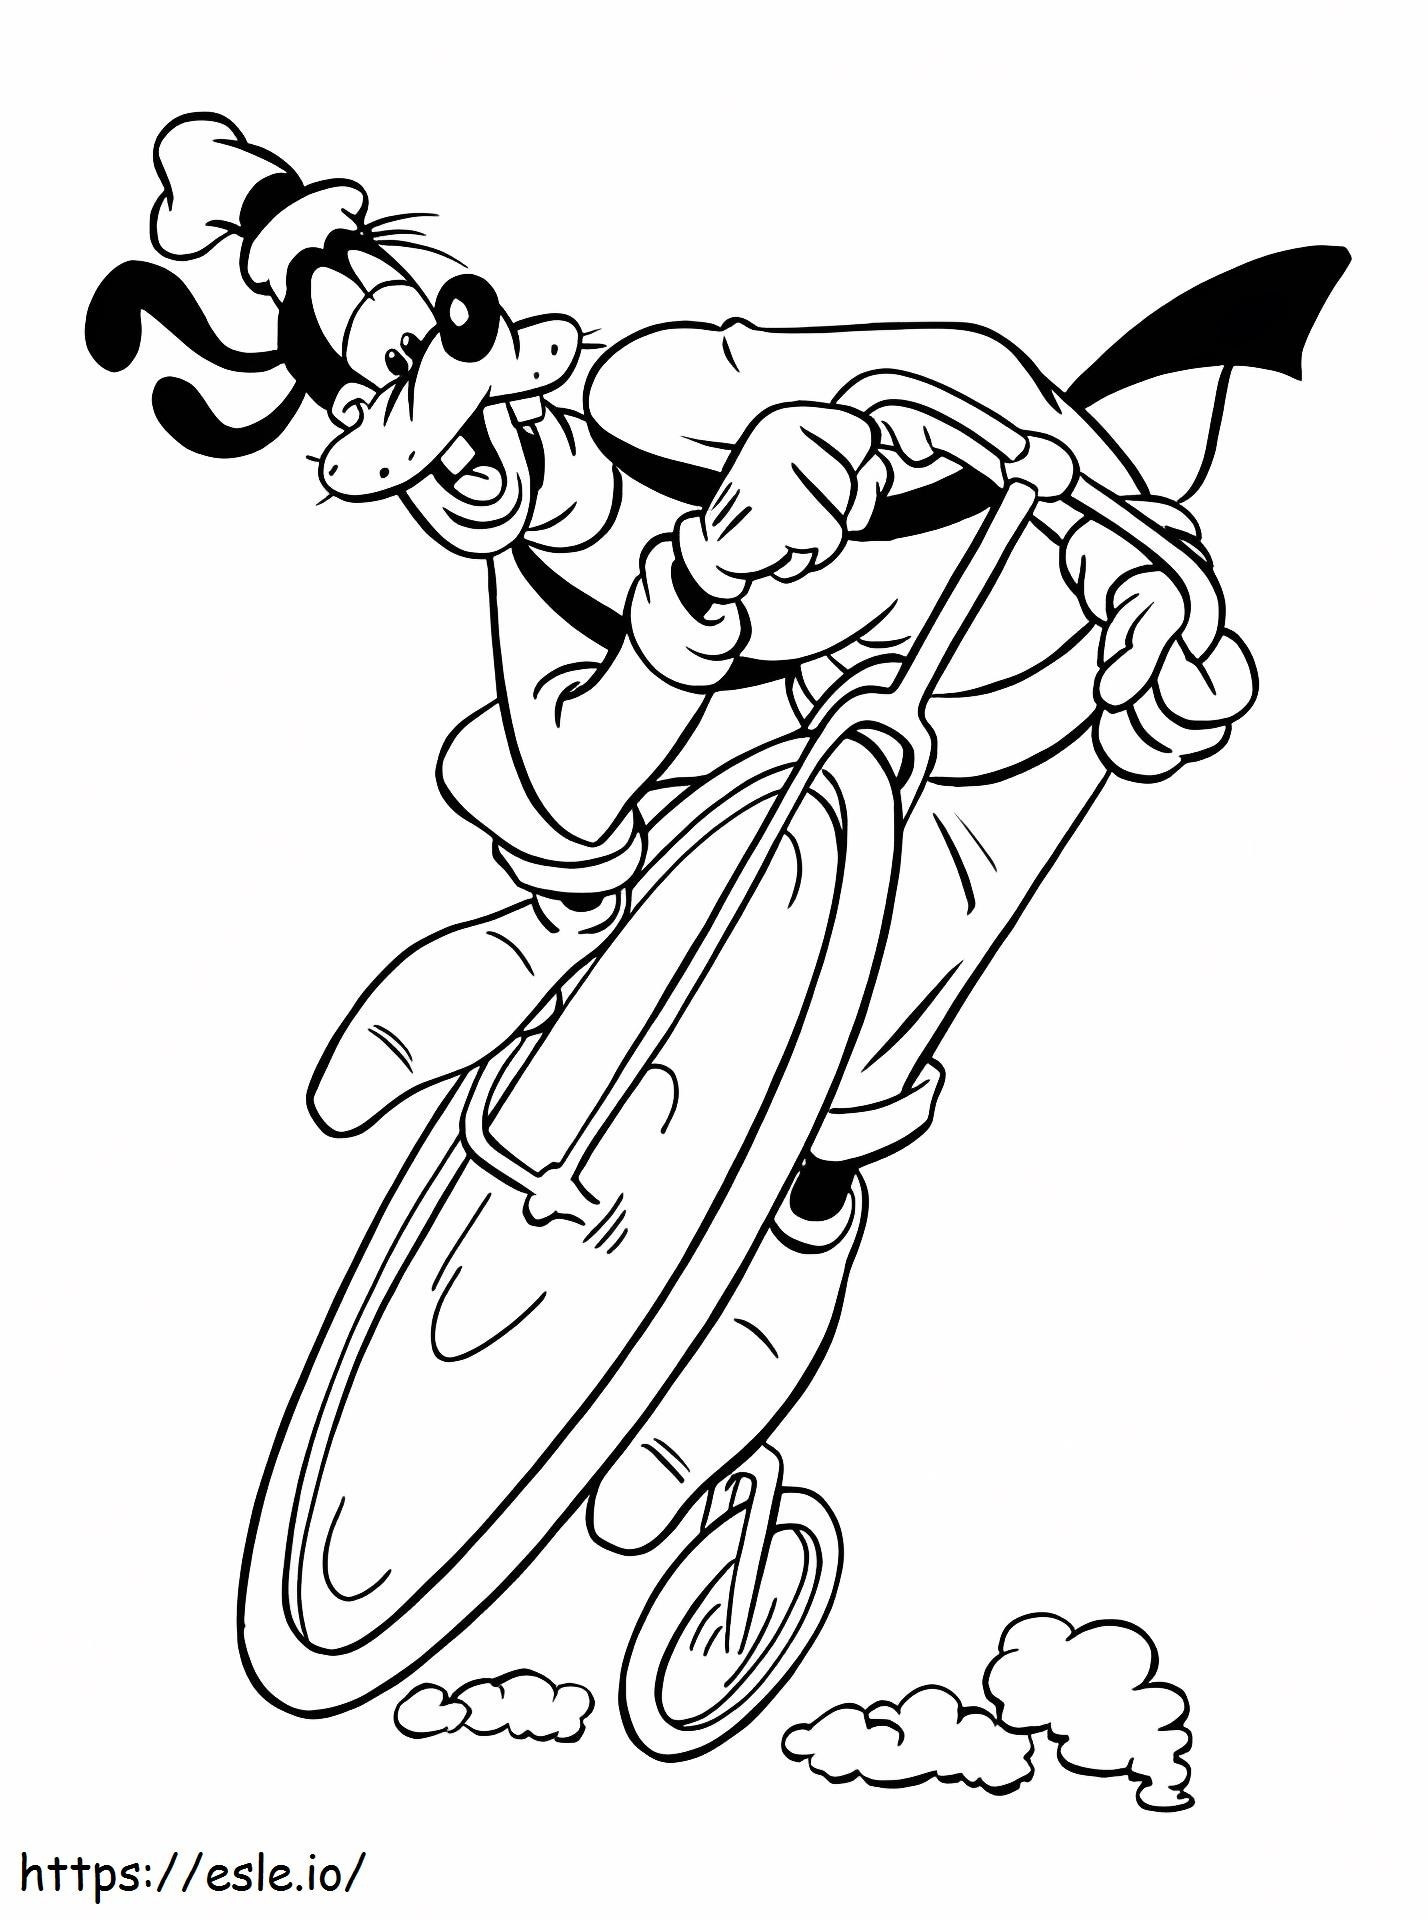 1532918184 Goofy Bicycling A4 coloring page